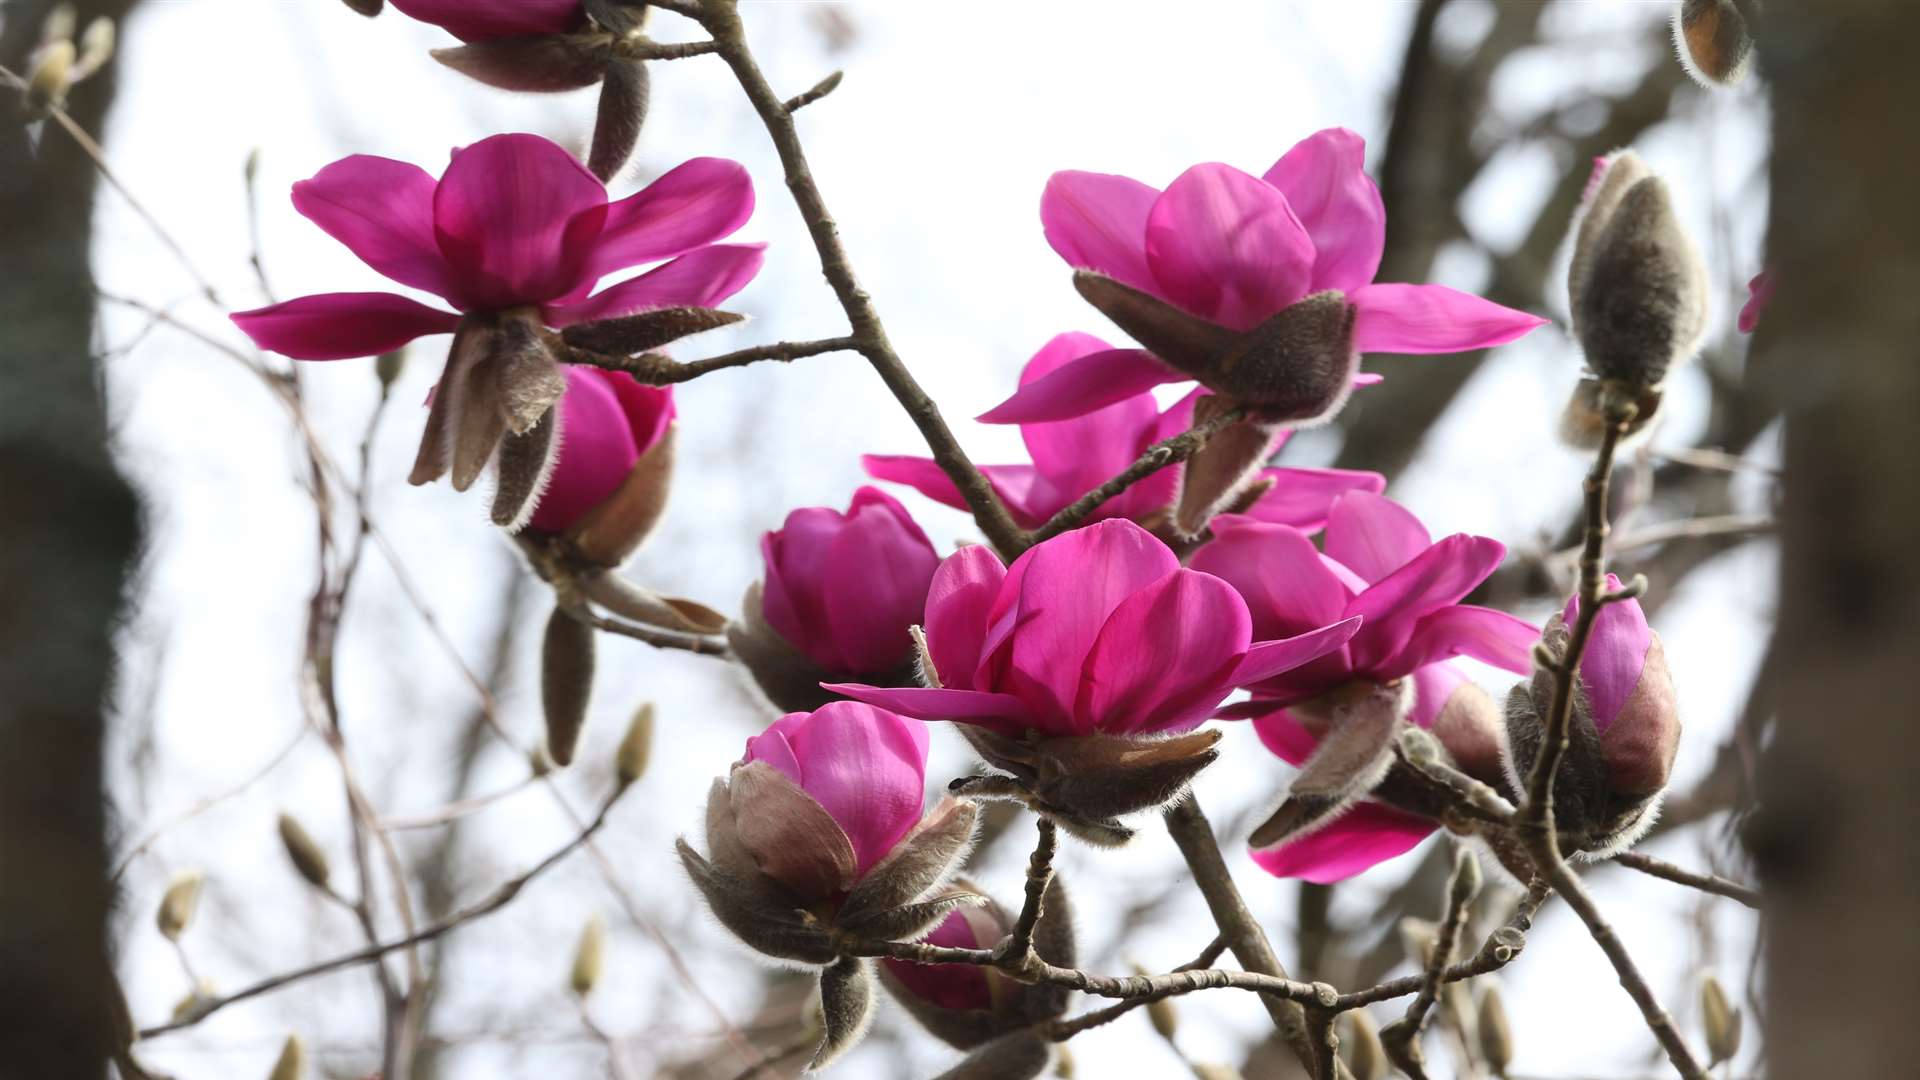 New magnolia hybrid Kevin Hughes will be planted at Great Comp Gardens' Spring Fling